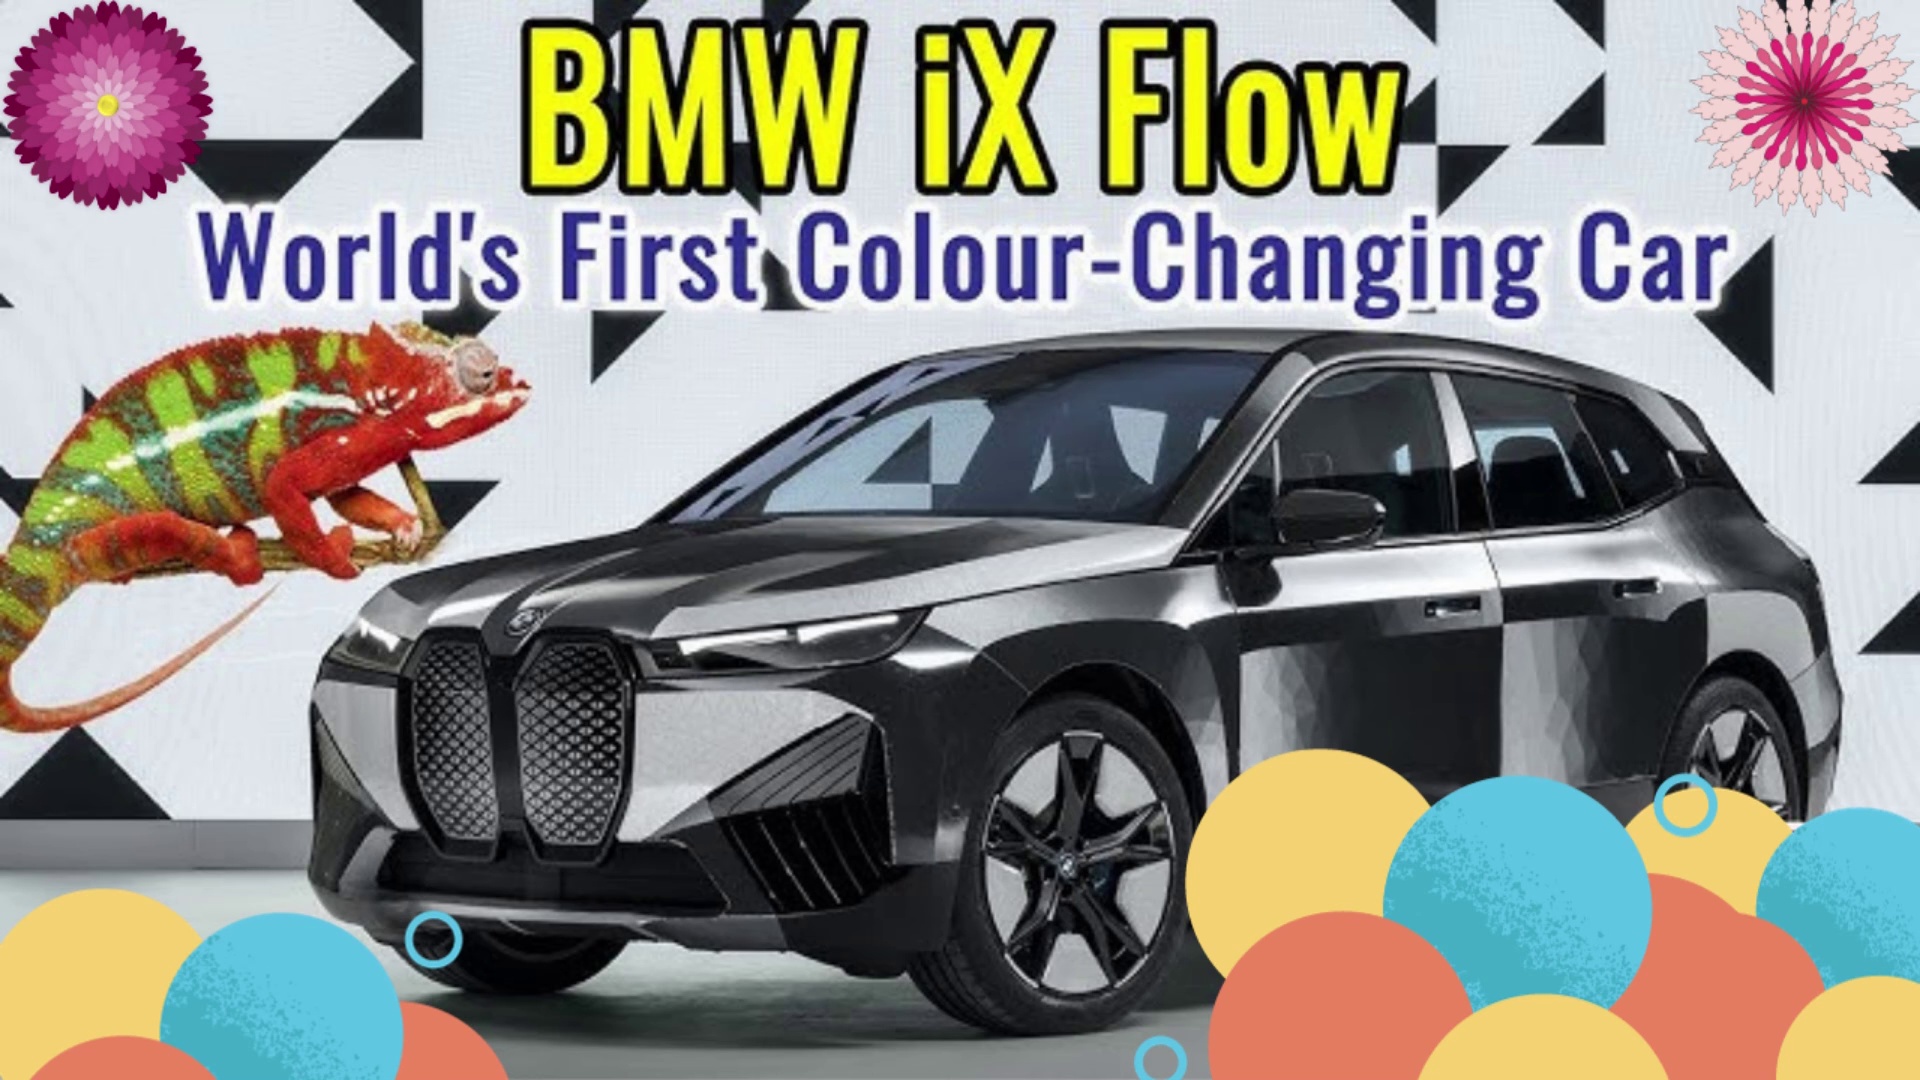 BMW iX Flow : World’s First Color-Changing Car